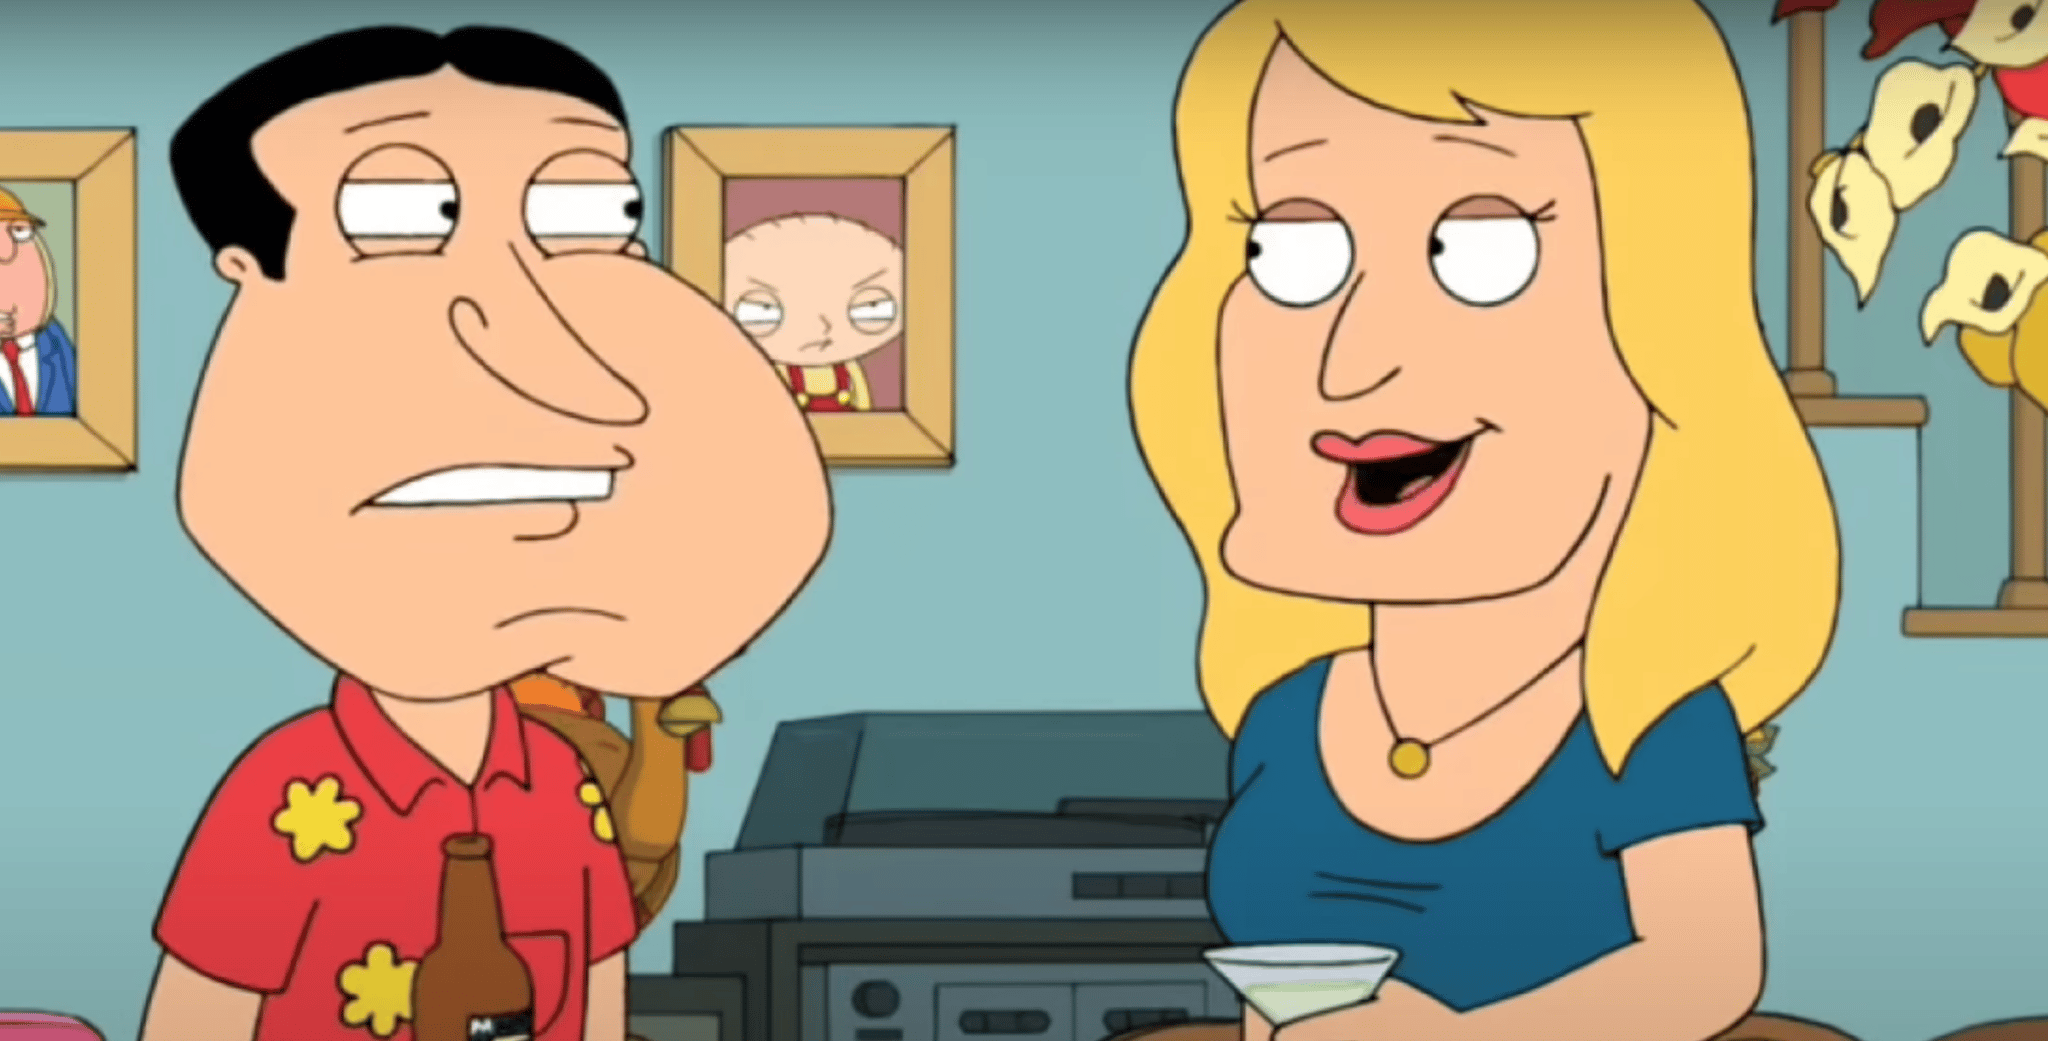 What do you think Peter's secret gay boyfriend is like? : r/familyguy